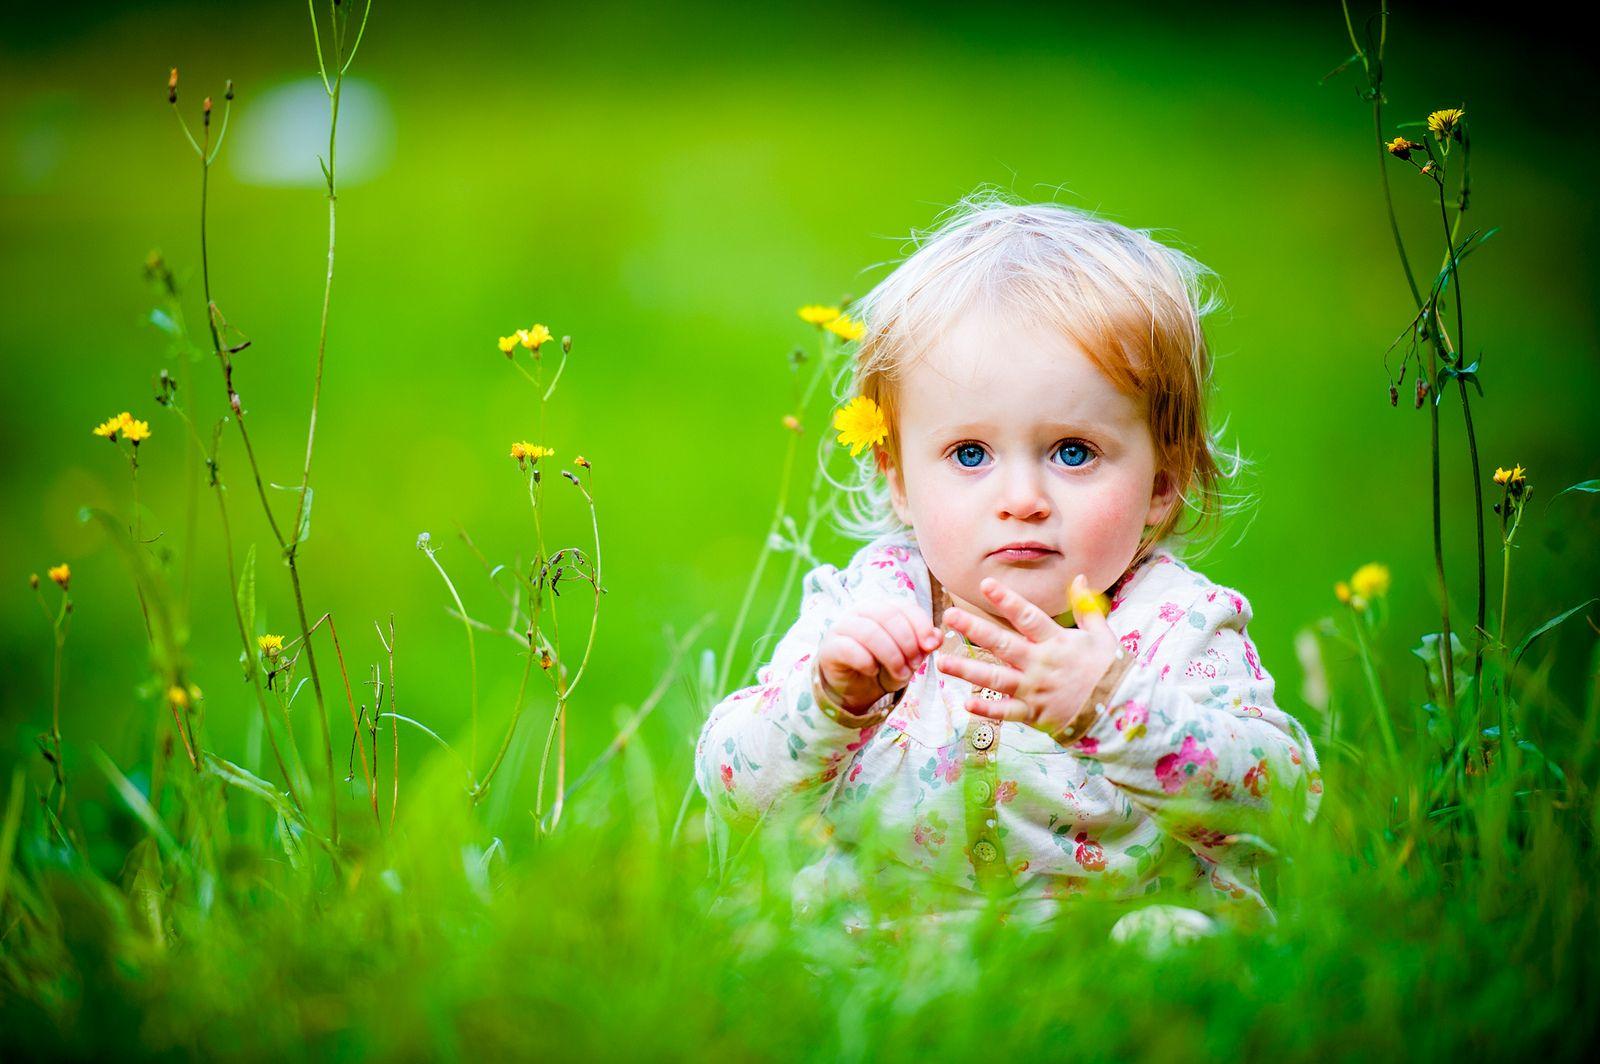 Baby Girl Wallpaper, Full HD 1080p, Best HD Baby Girl Picture